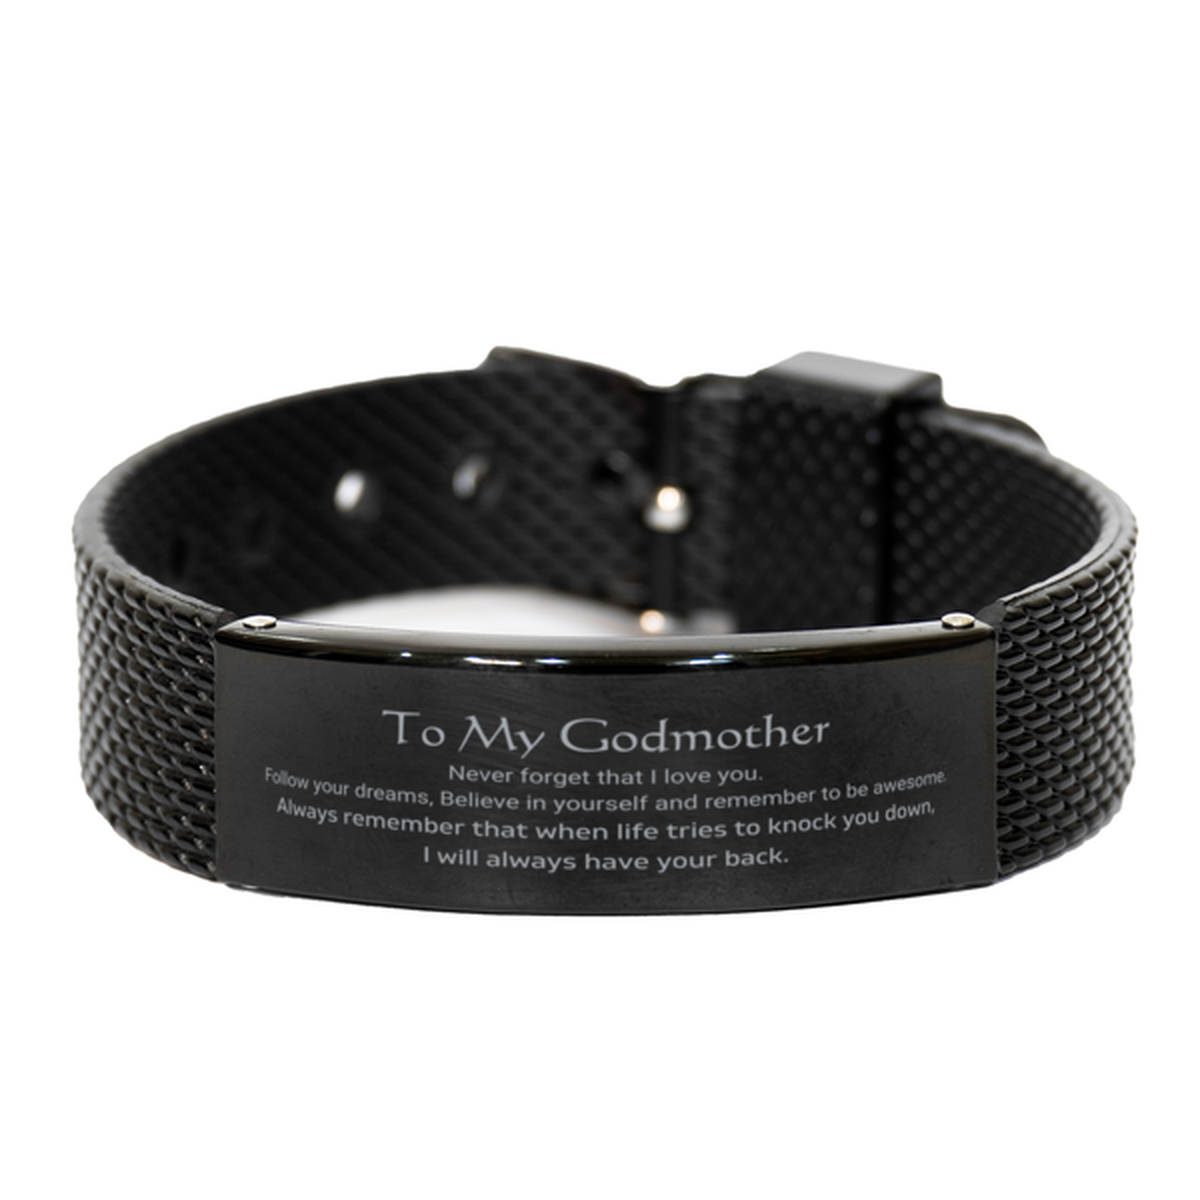 Inspirational Gifts for Godmother, Follow your dreams, Believe in yourself, Godmother Black Shark Mesh Bracelet, Birthday Christmas Unique Gifts For Godmother